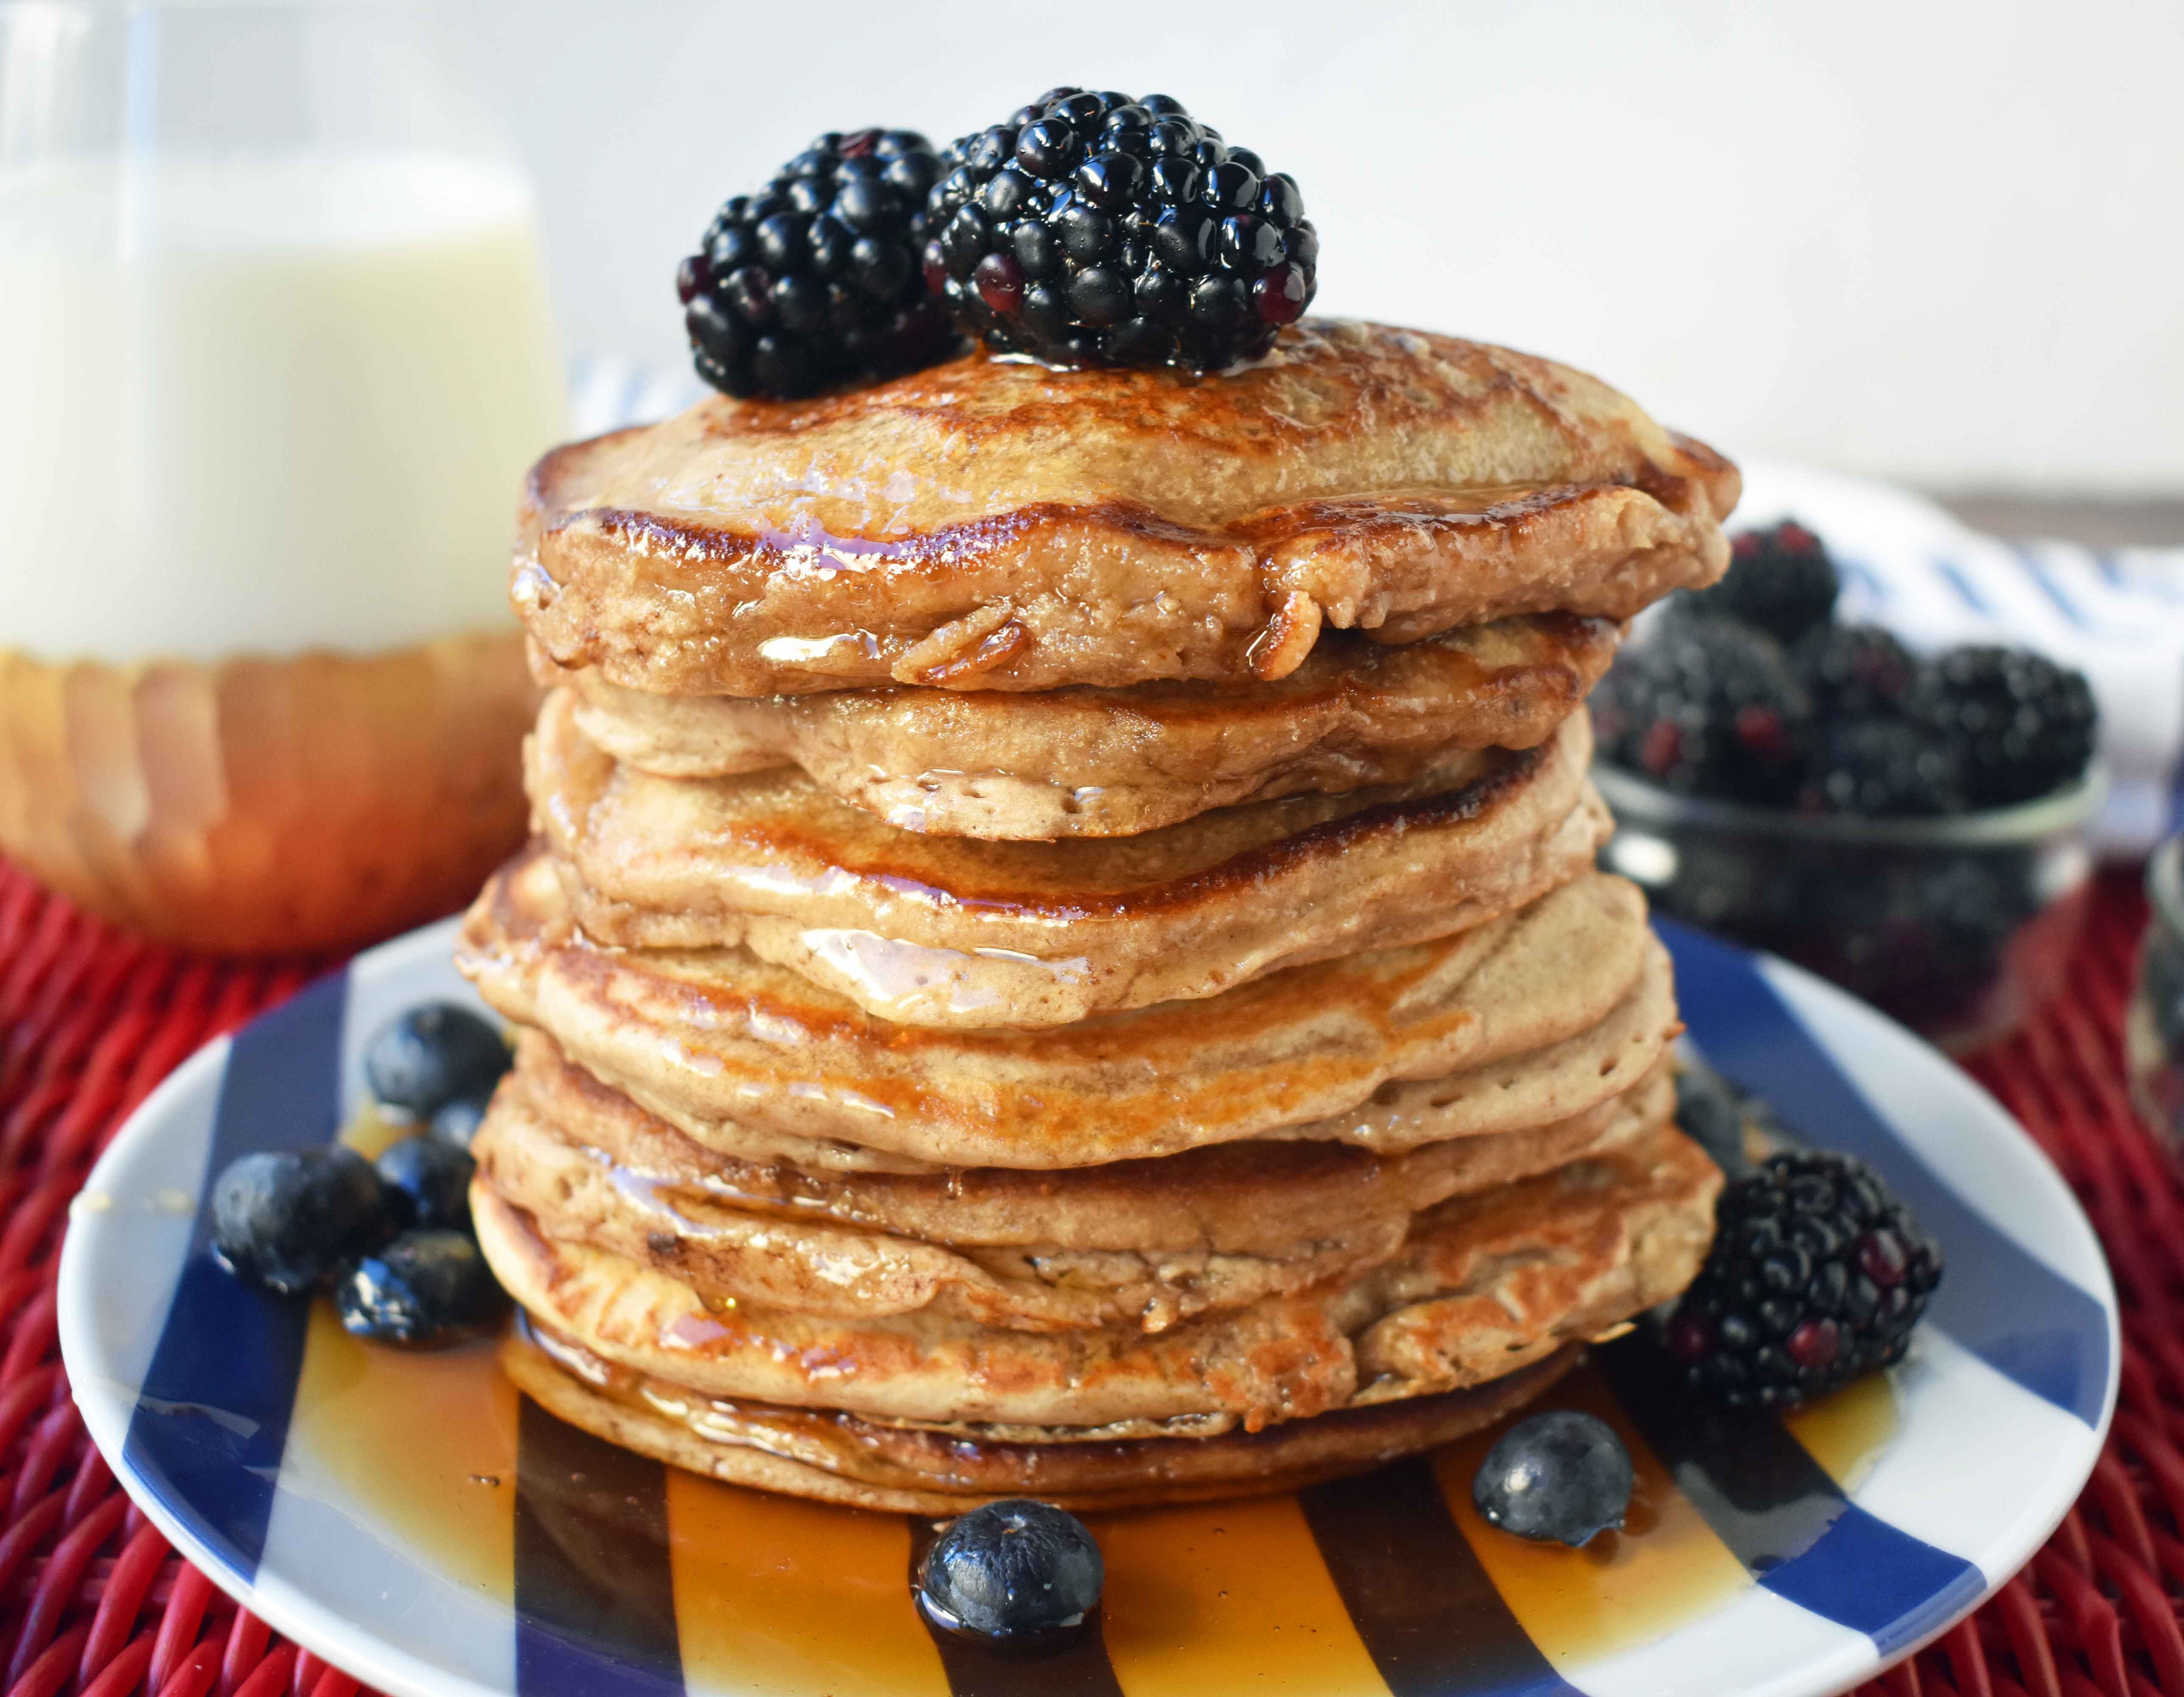 Healthy Banana Oatmeal Pancakes by Modern Honey. No sugar, No oil, Gluten-free, Dairy-free pancakes. Made with only 7 ingredients - oats, almond milk, banana, eggs, egg whites, baking powder, salt, and a touch of real maple syrup.